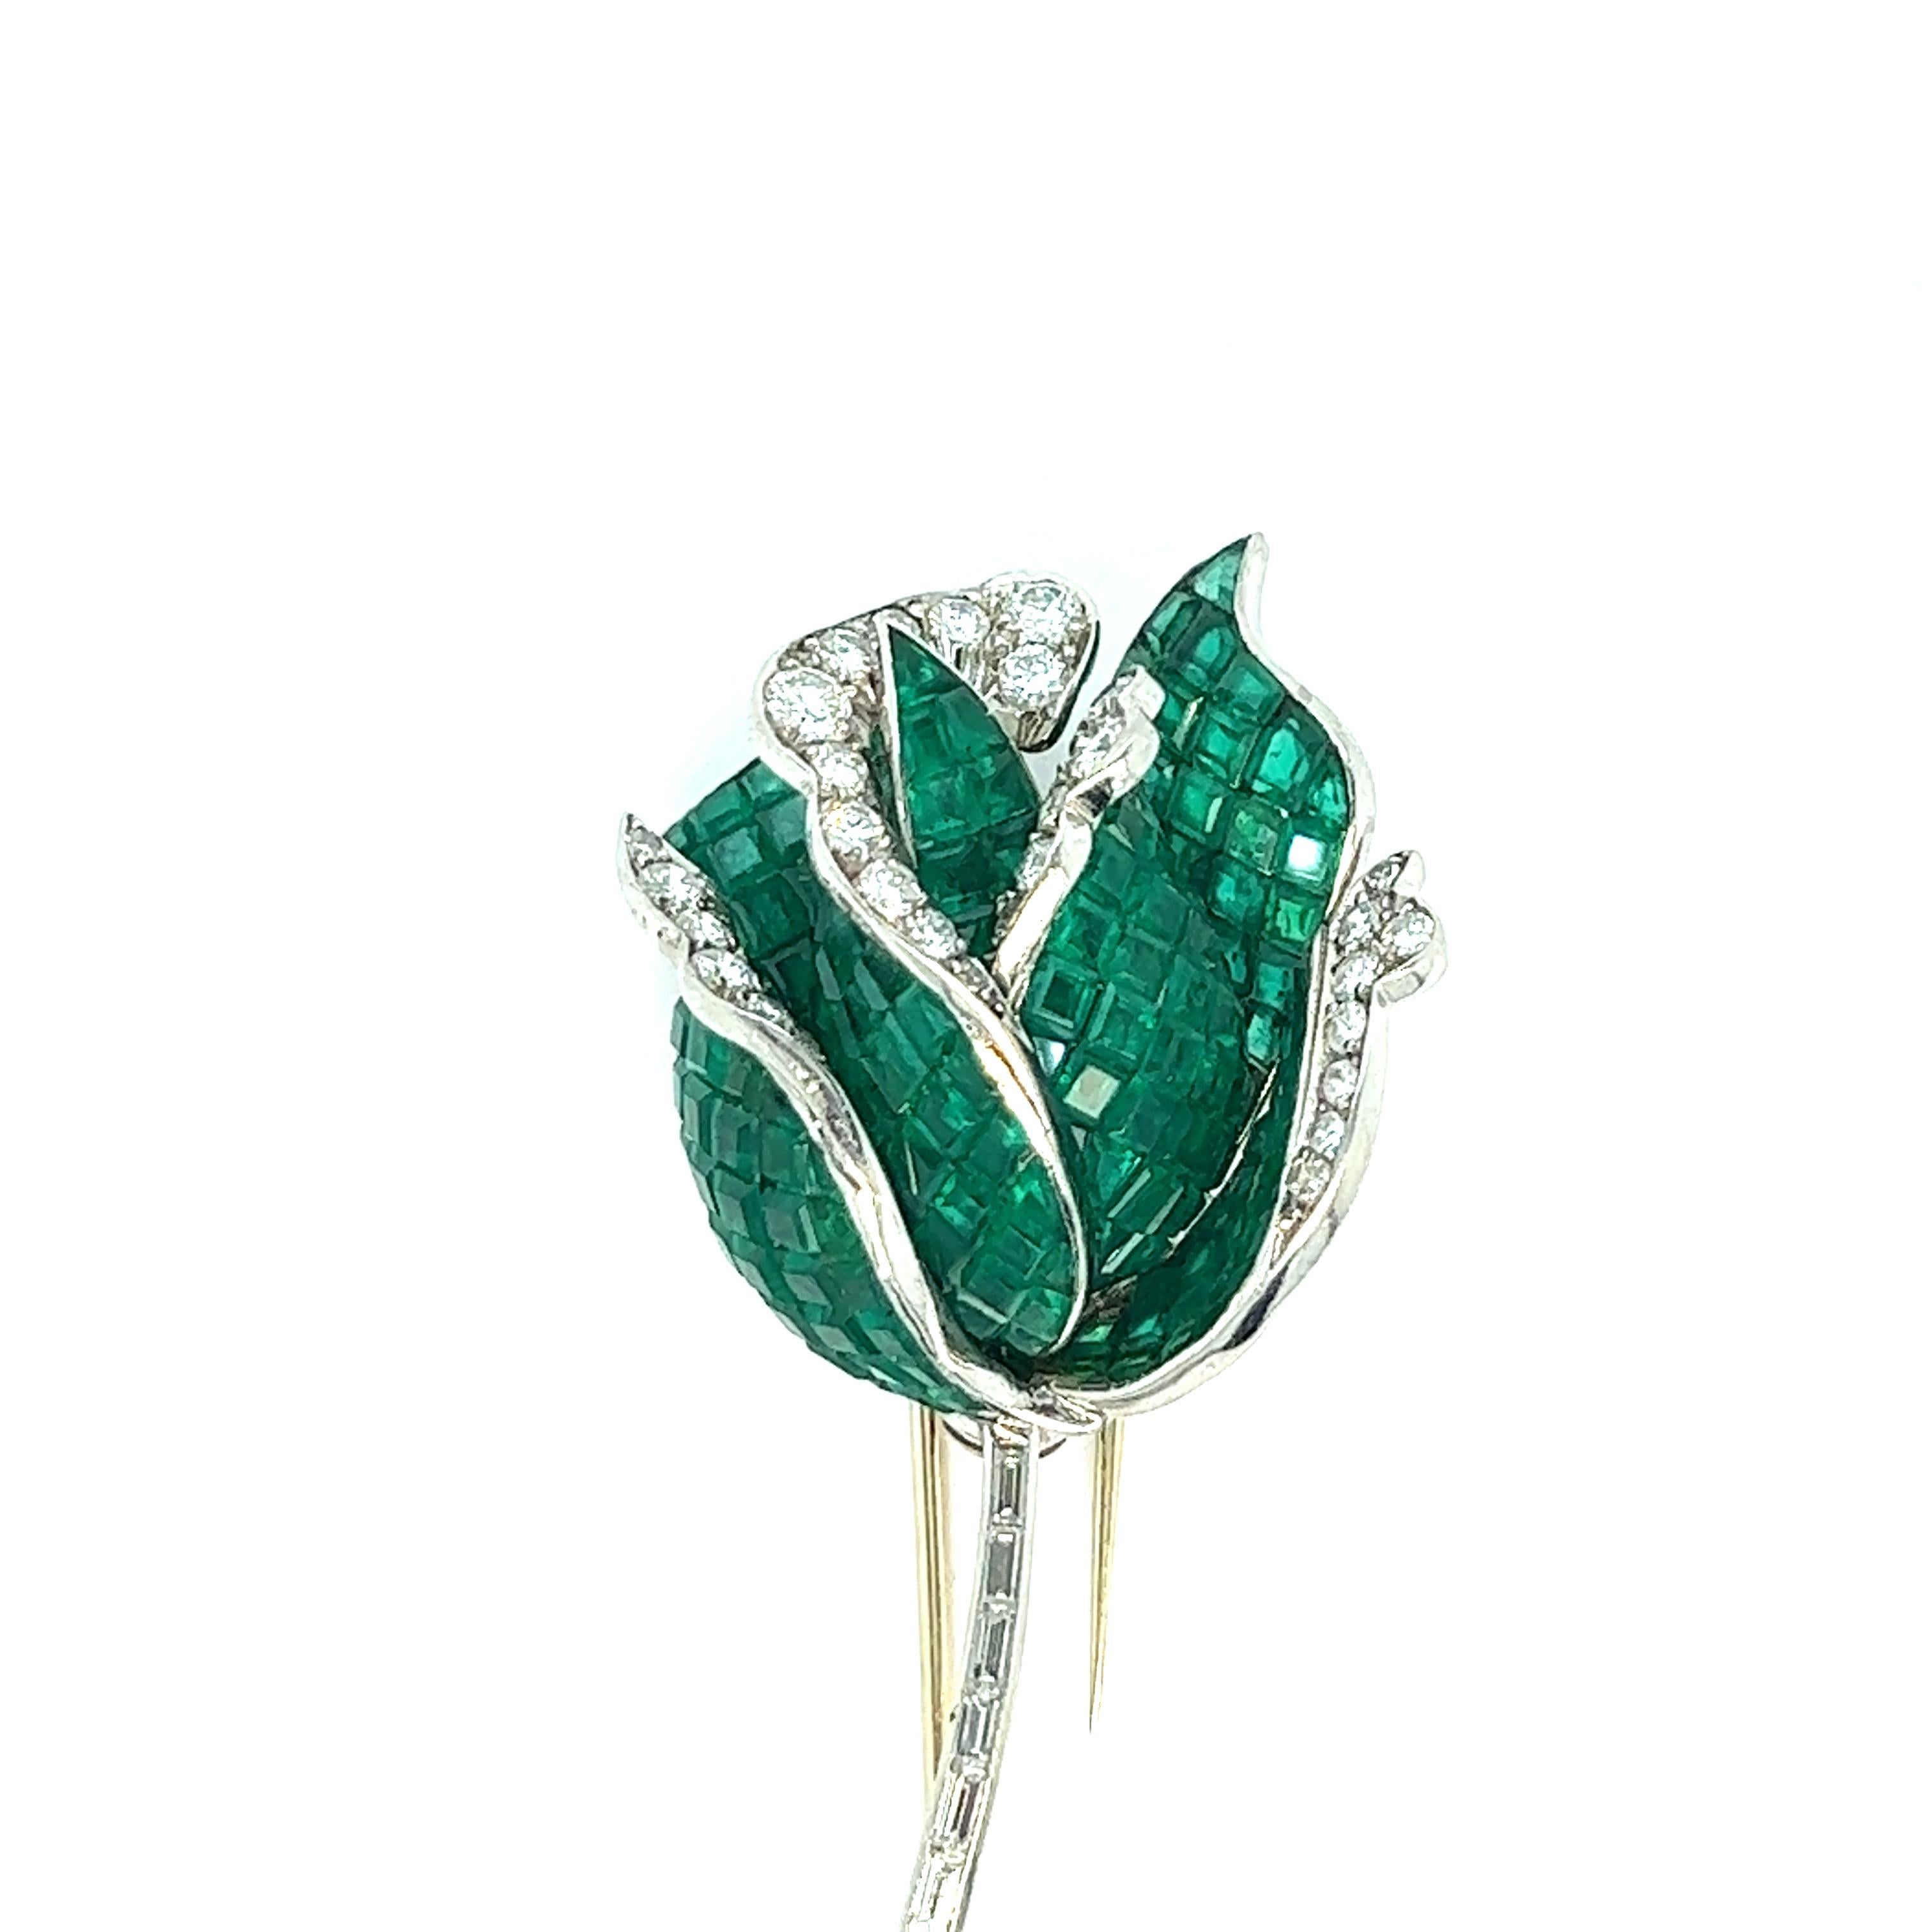 Emerald diamond rose brooch 

1950s very high quality French brooch, featuring invisible baguette-cut emeralds of approximately 35 carats and round-cut diamonds of approximately 4.5 carats set in platinum; French maker's mark

Invisible emeralds are